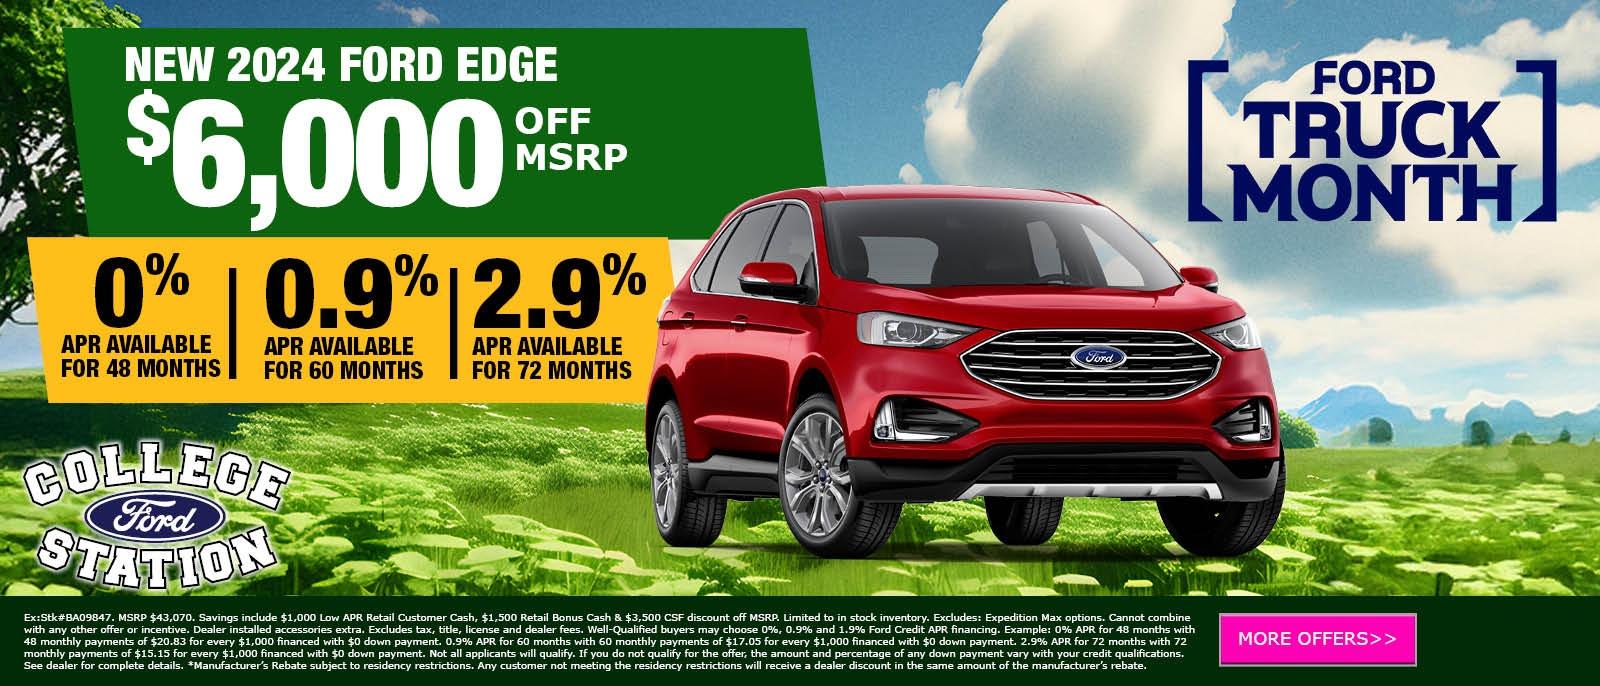 NEW 2024 FORD EDGE $6,000 OFF MSRP
0% APR AVAILABLE FOR 48 MONTHS
0.9% APR AVAILABLE FOR 60 MONTHS
2.9% APR AVAILABLE FOR 72 MONTHS